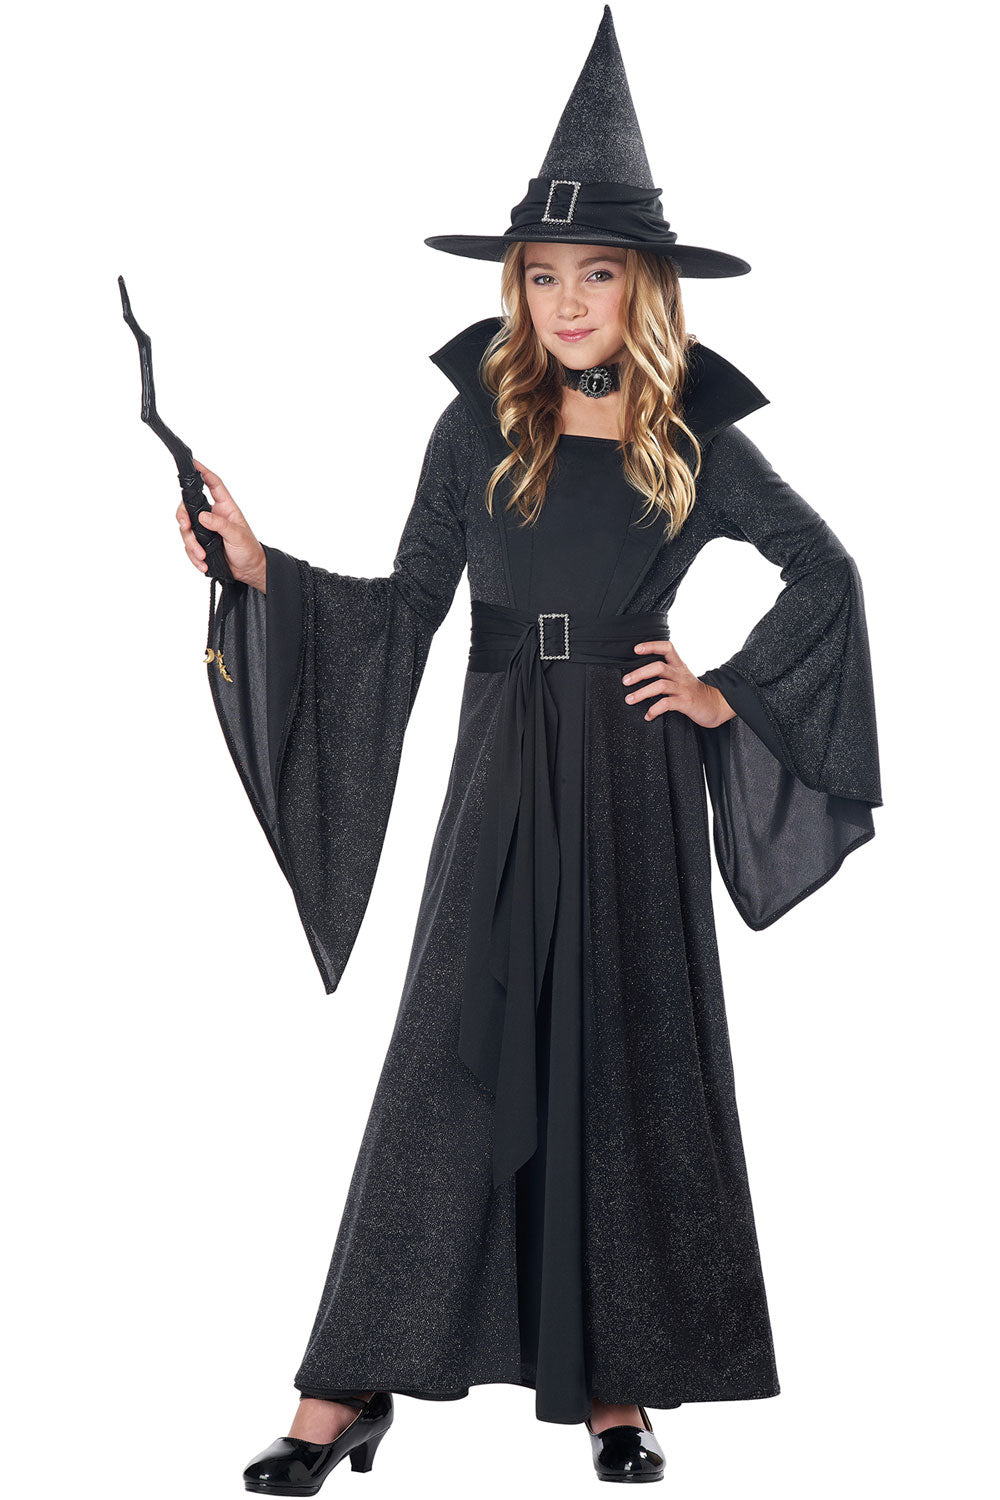 MOONLIGHT SHIMMER WITCH/CHILD California Costume 00493